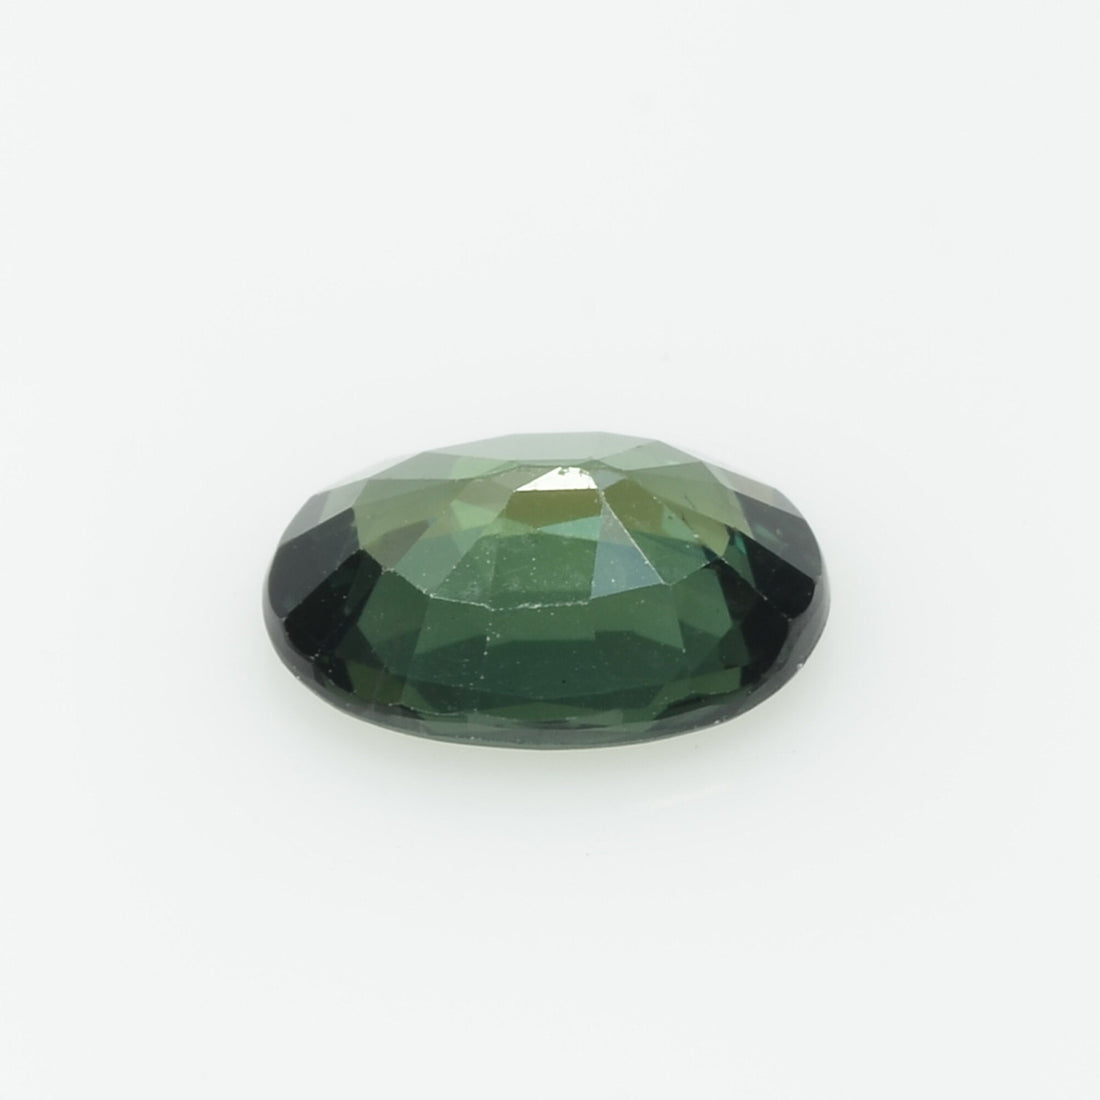 1.27 cts Natural Green Sapphire Loose Gemstone Oval Cut